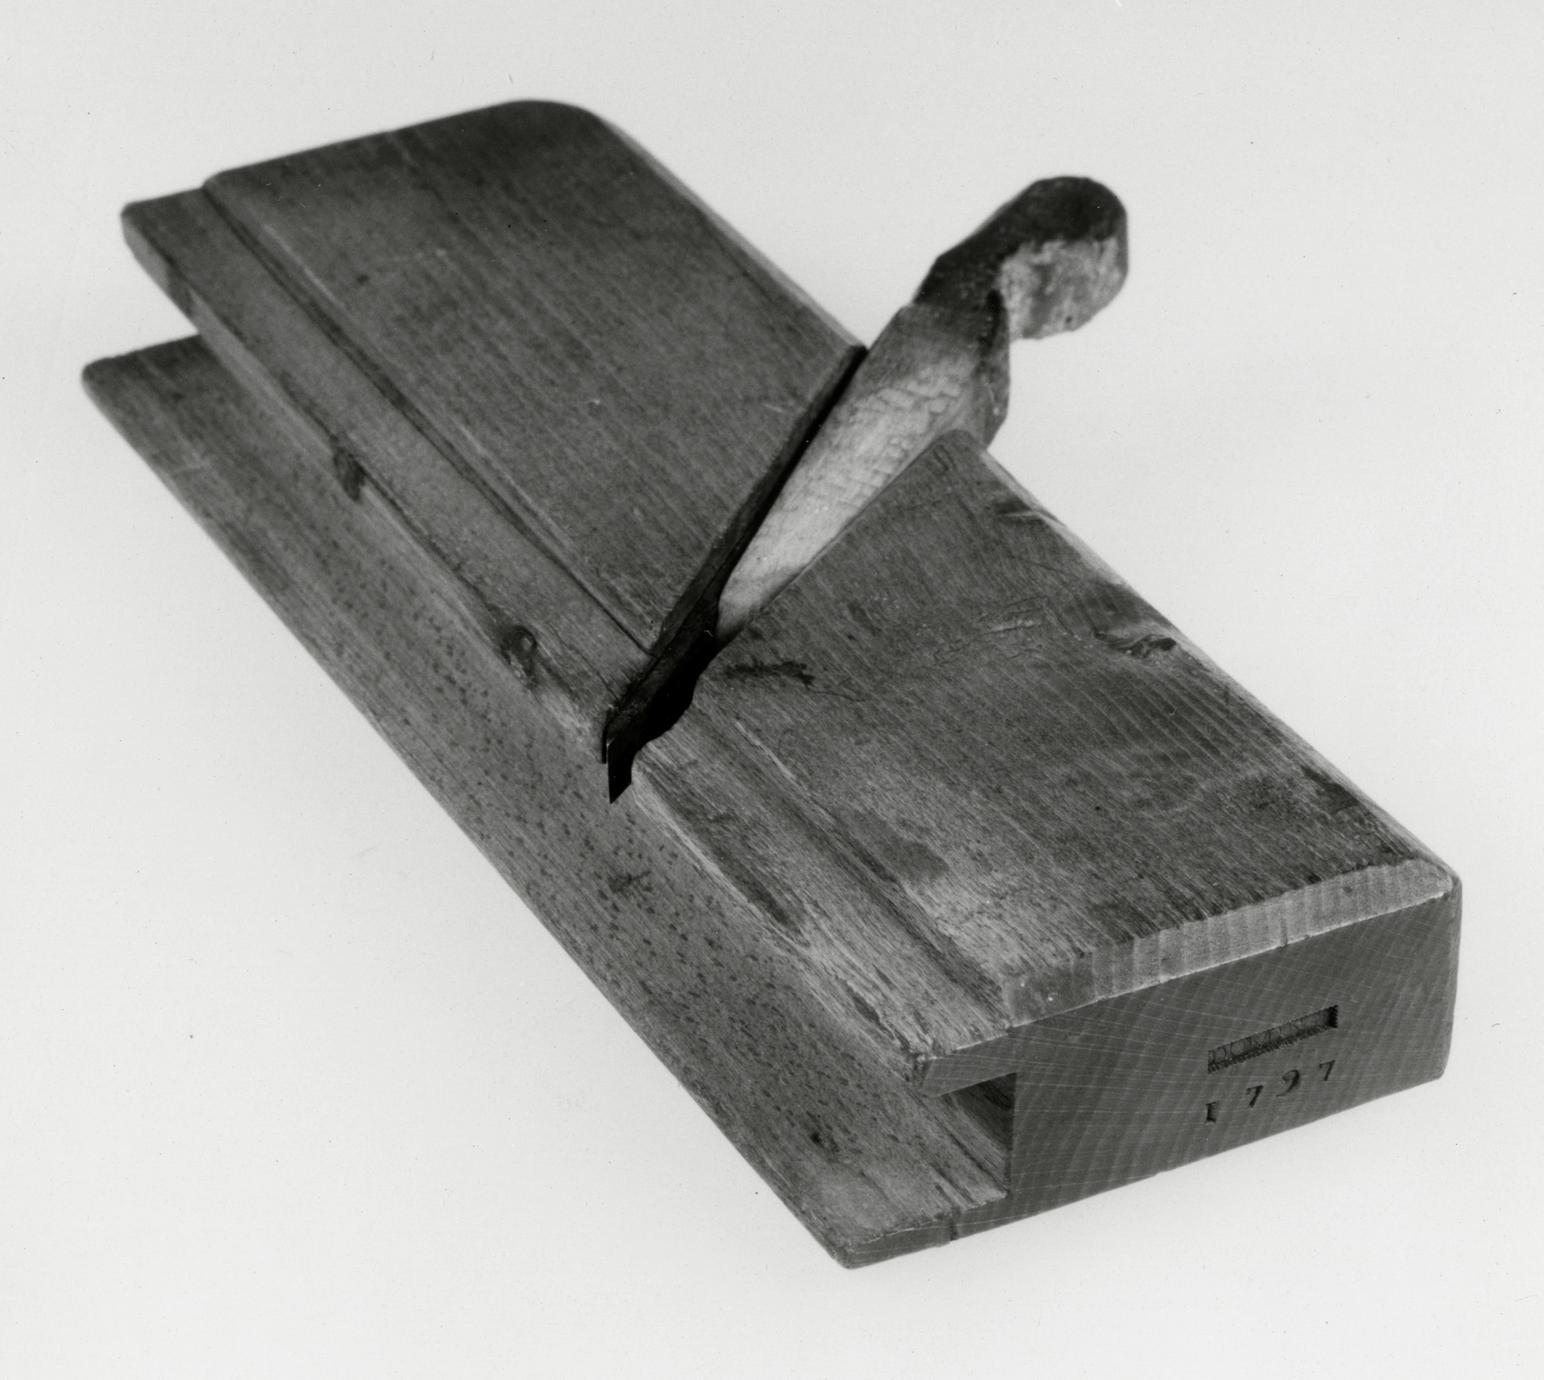 Black and white photograph of a plow and rabbet plane.